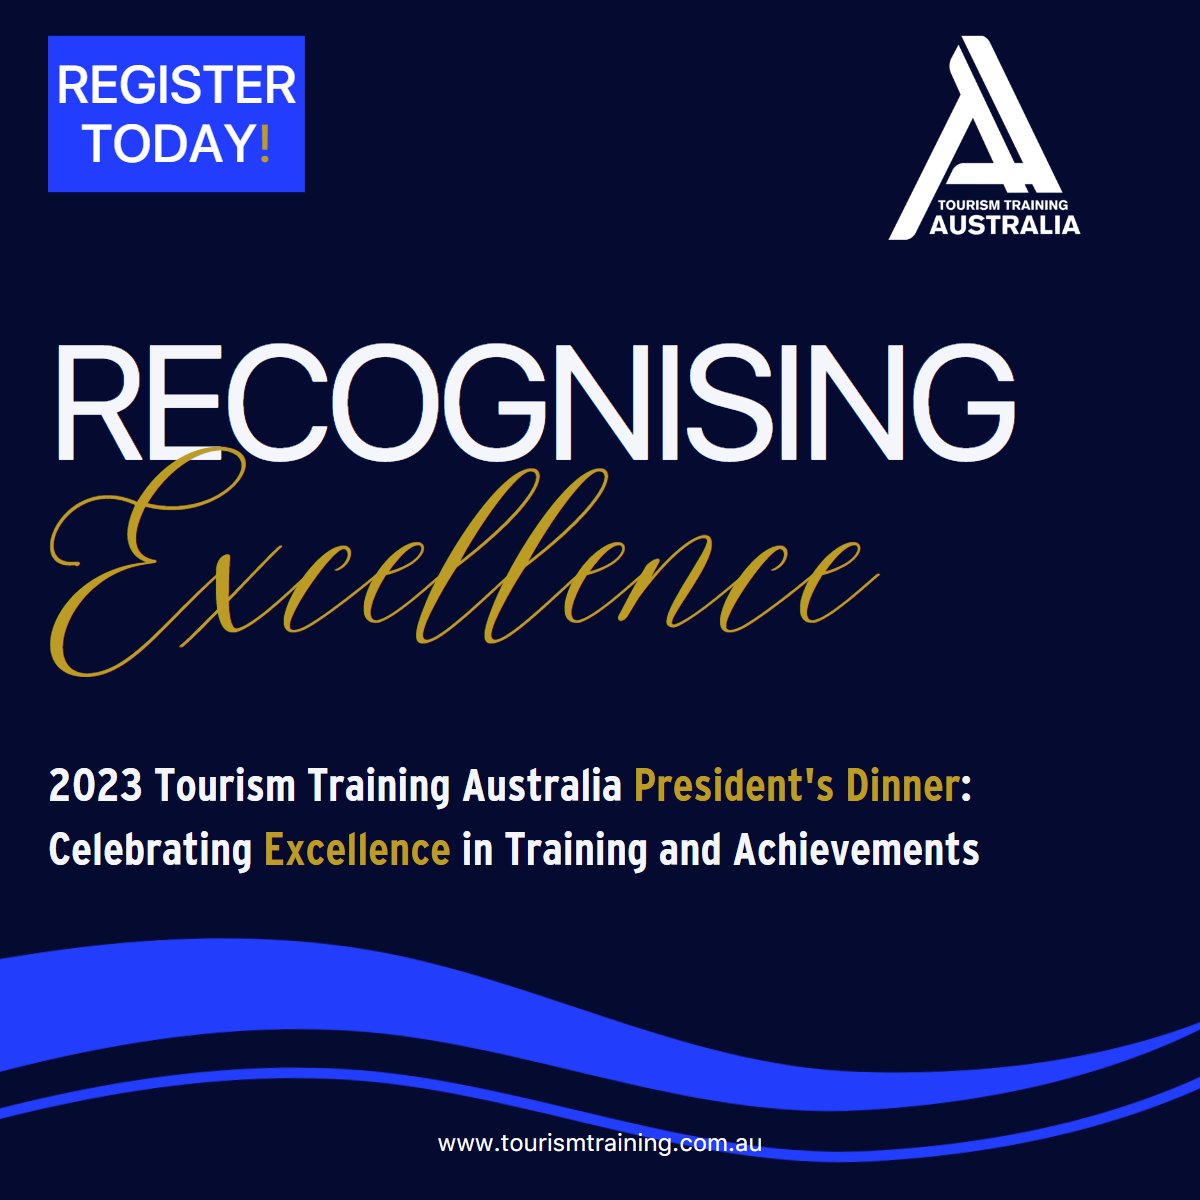 Tickets for the 2023 President's Dinner & Training Awards go on sale 9am, June 1st. Join us to honour standout educators in Travel & Tourism, Events, & Hospitality, celebrate the Galvin Foundation scholarship. #TTA2023 #PresidentsDinner #TrainingAwards
eventbrite.com.au/e/2023-preside…